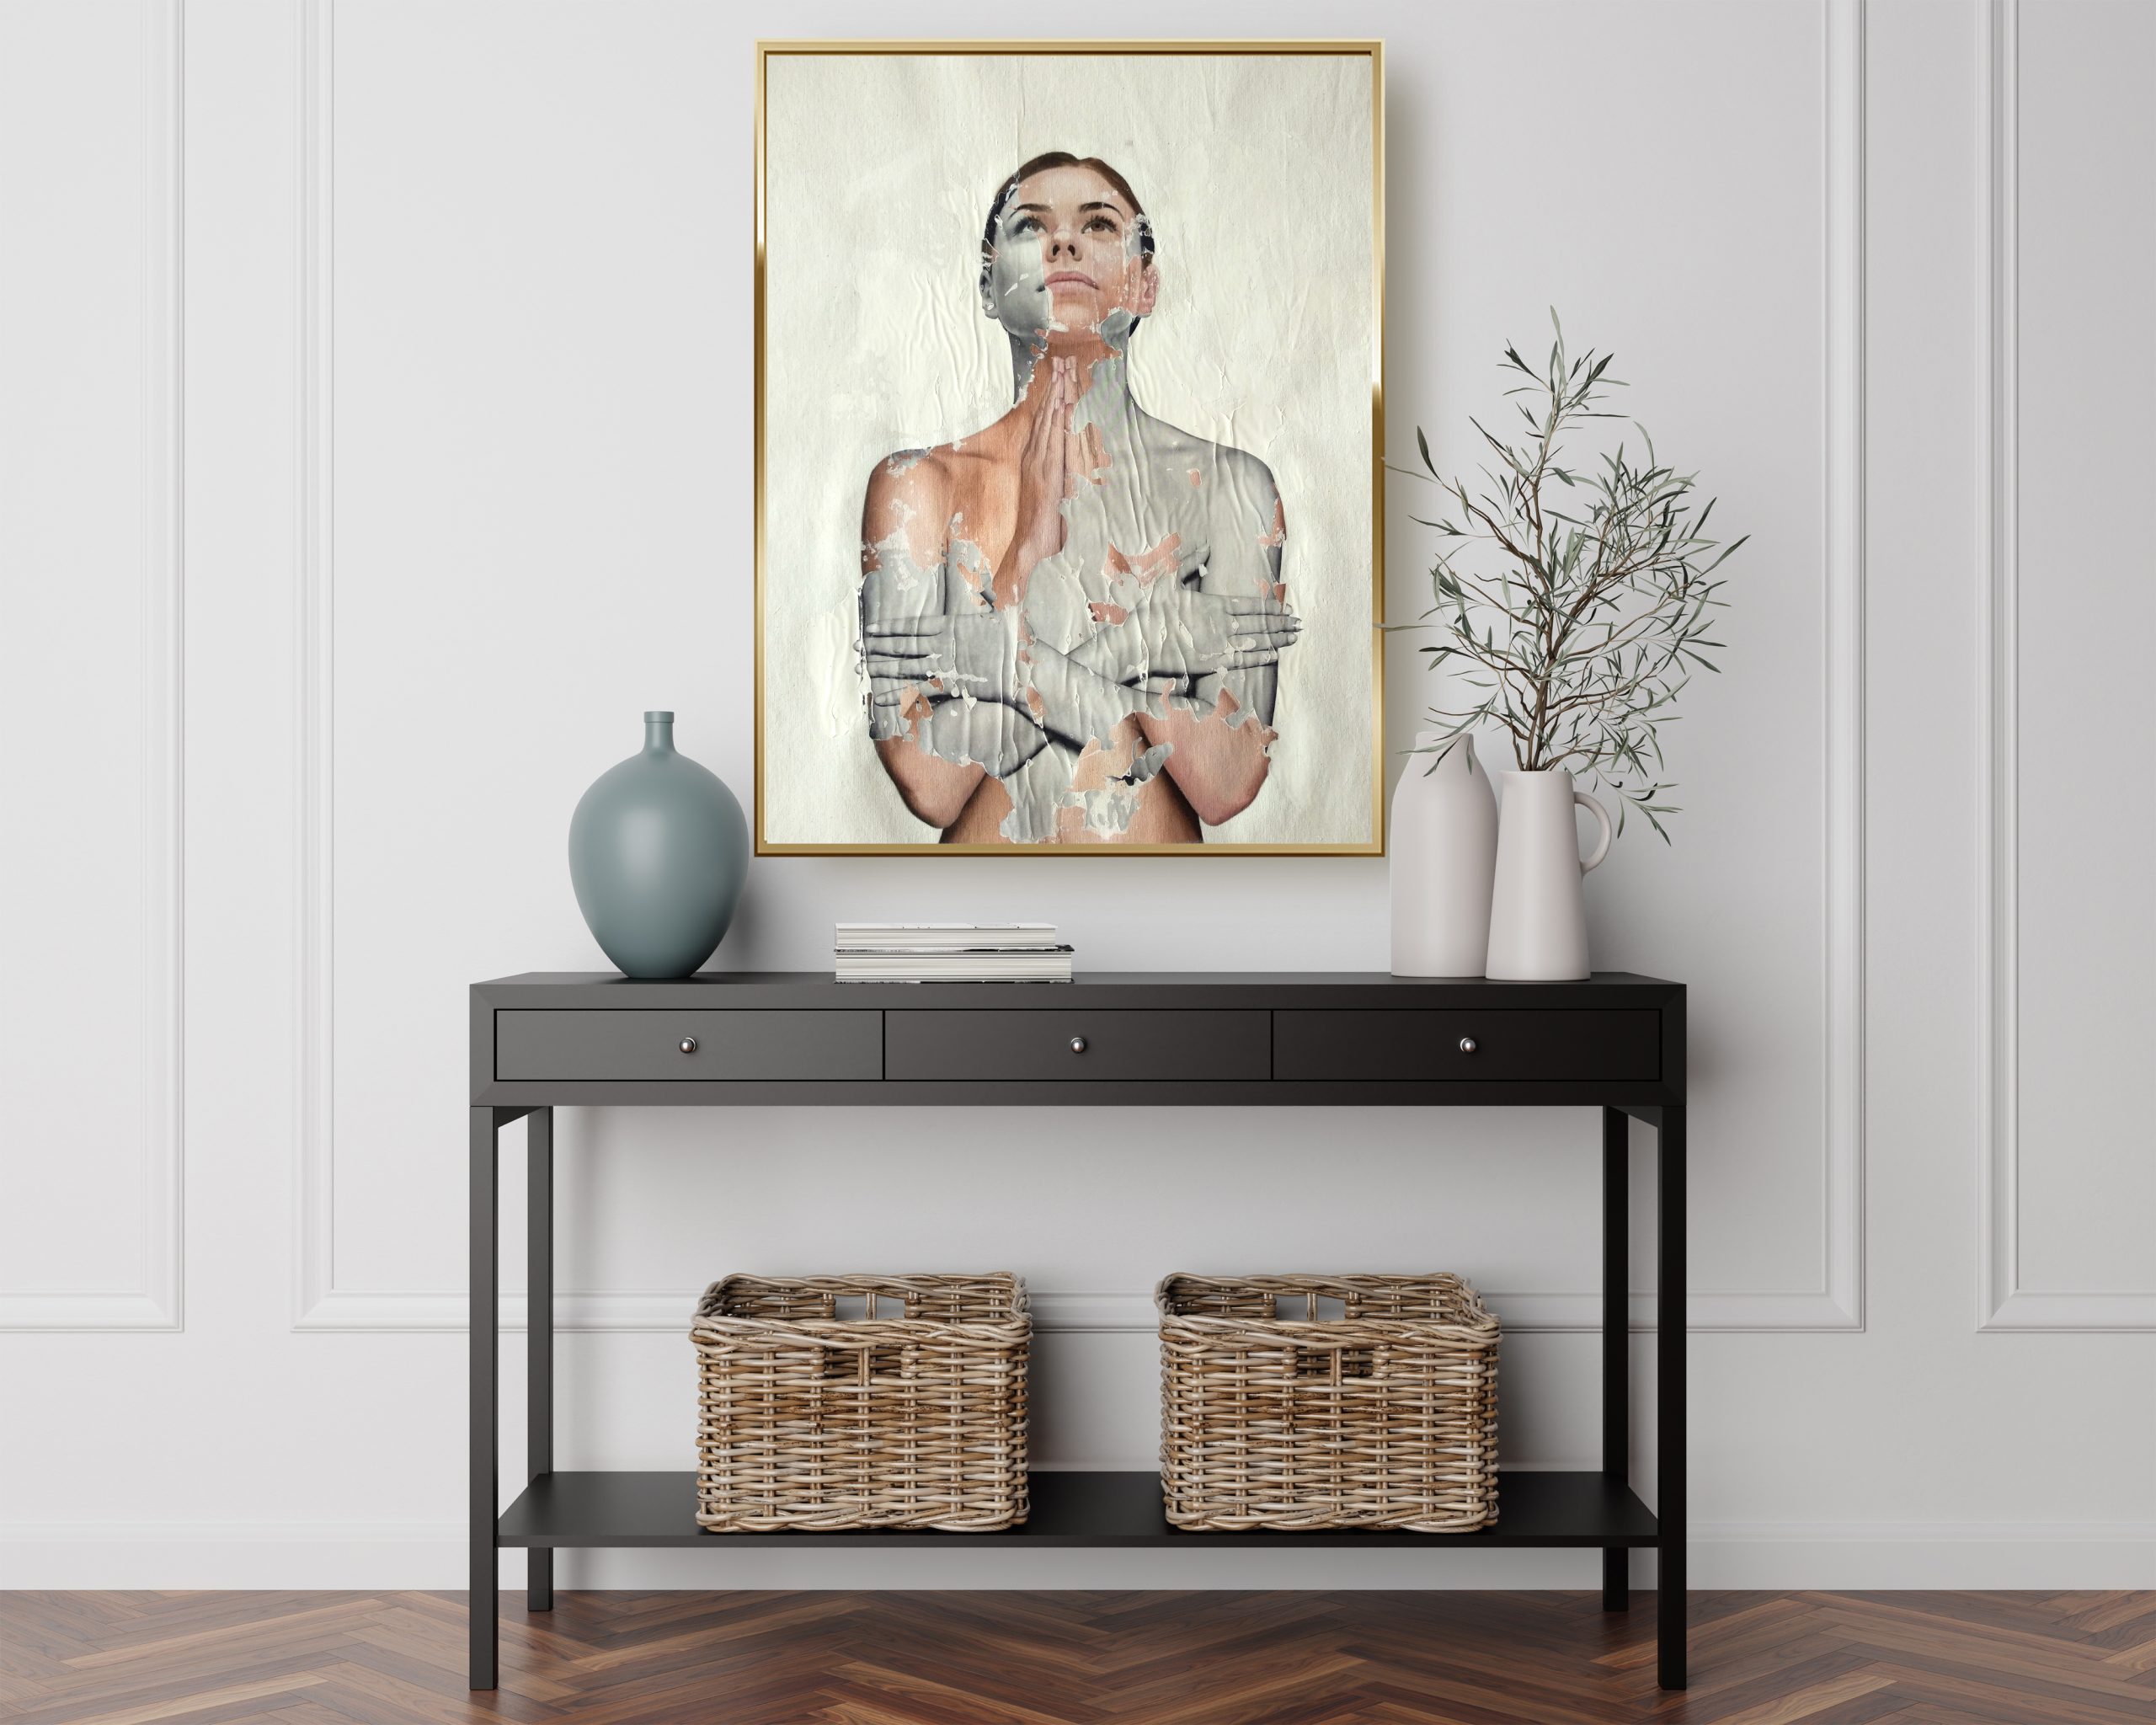 Fidem, Raúl Lara mixed media and image transfer in Neophotorealism style on Contemporary Modern Foyer Living Room Blank